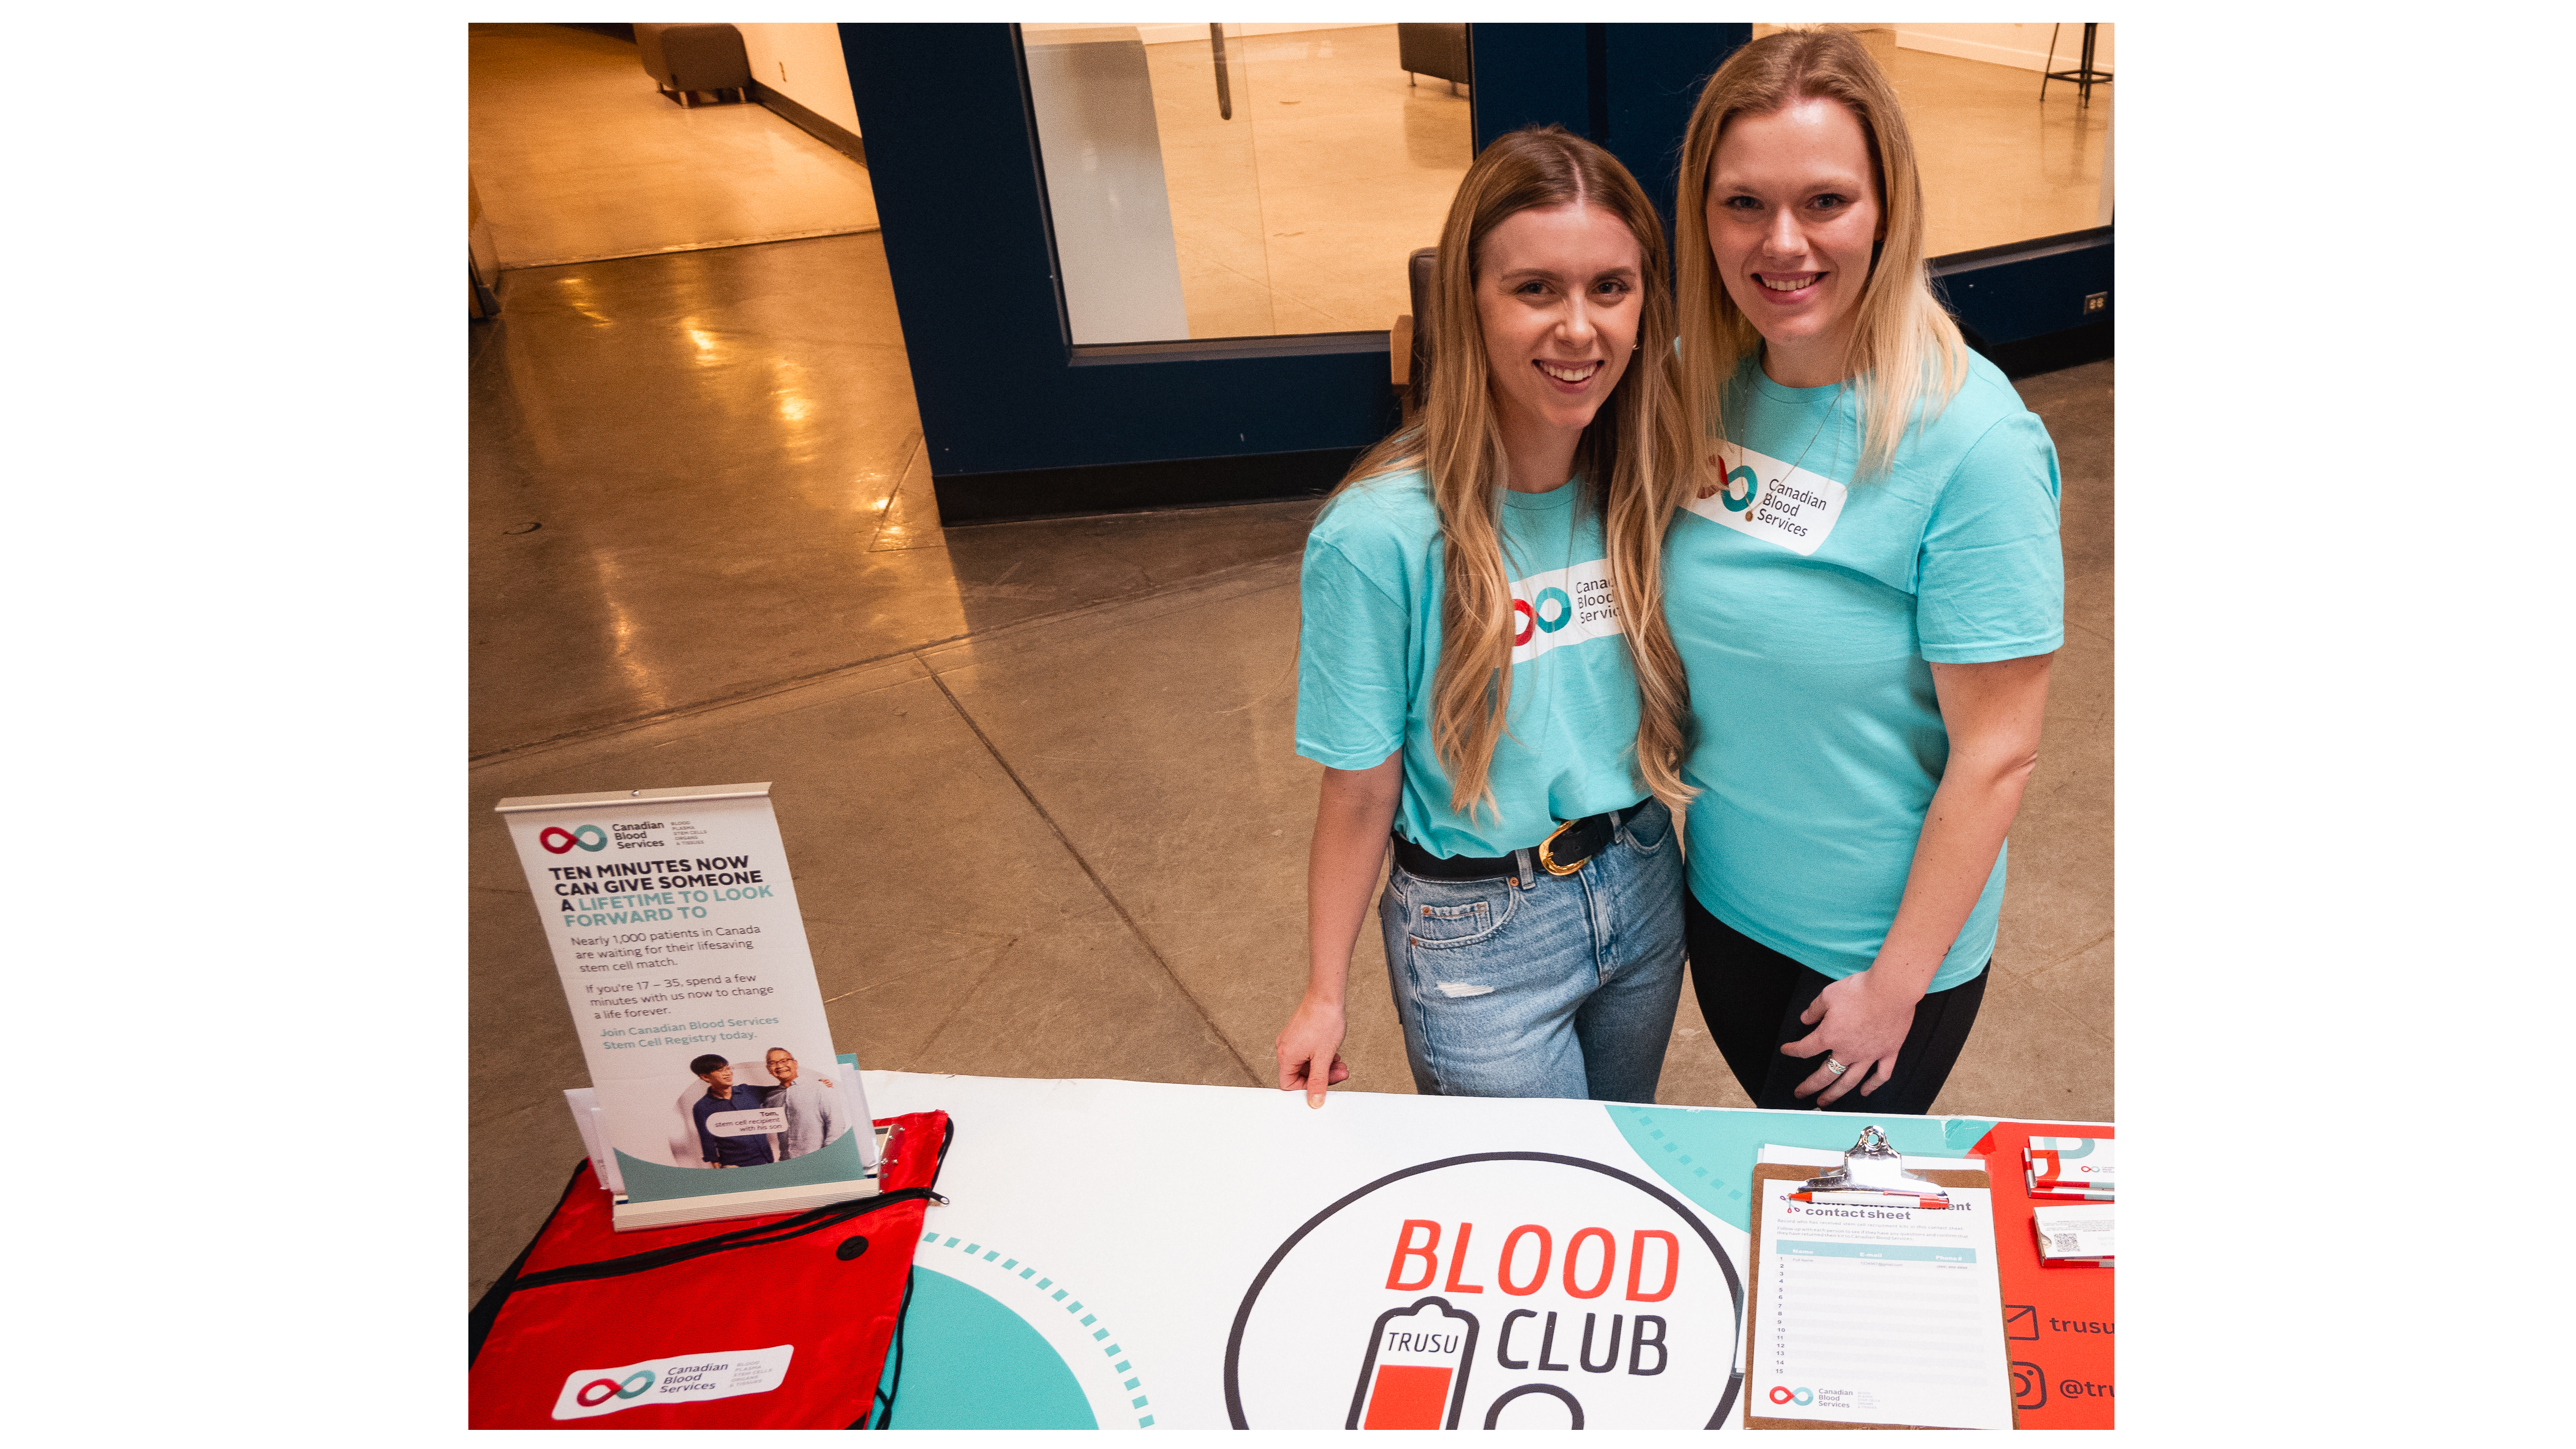 Blood Club president, Emily Fagg stands on the left side of the picture with club vice-president Tess Russell for a table event in Old Main. Both women are wearing teal coloured shirts.